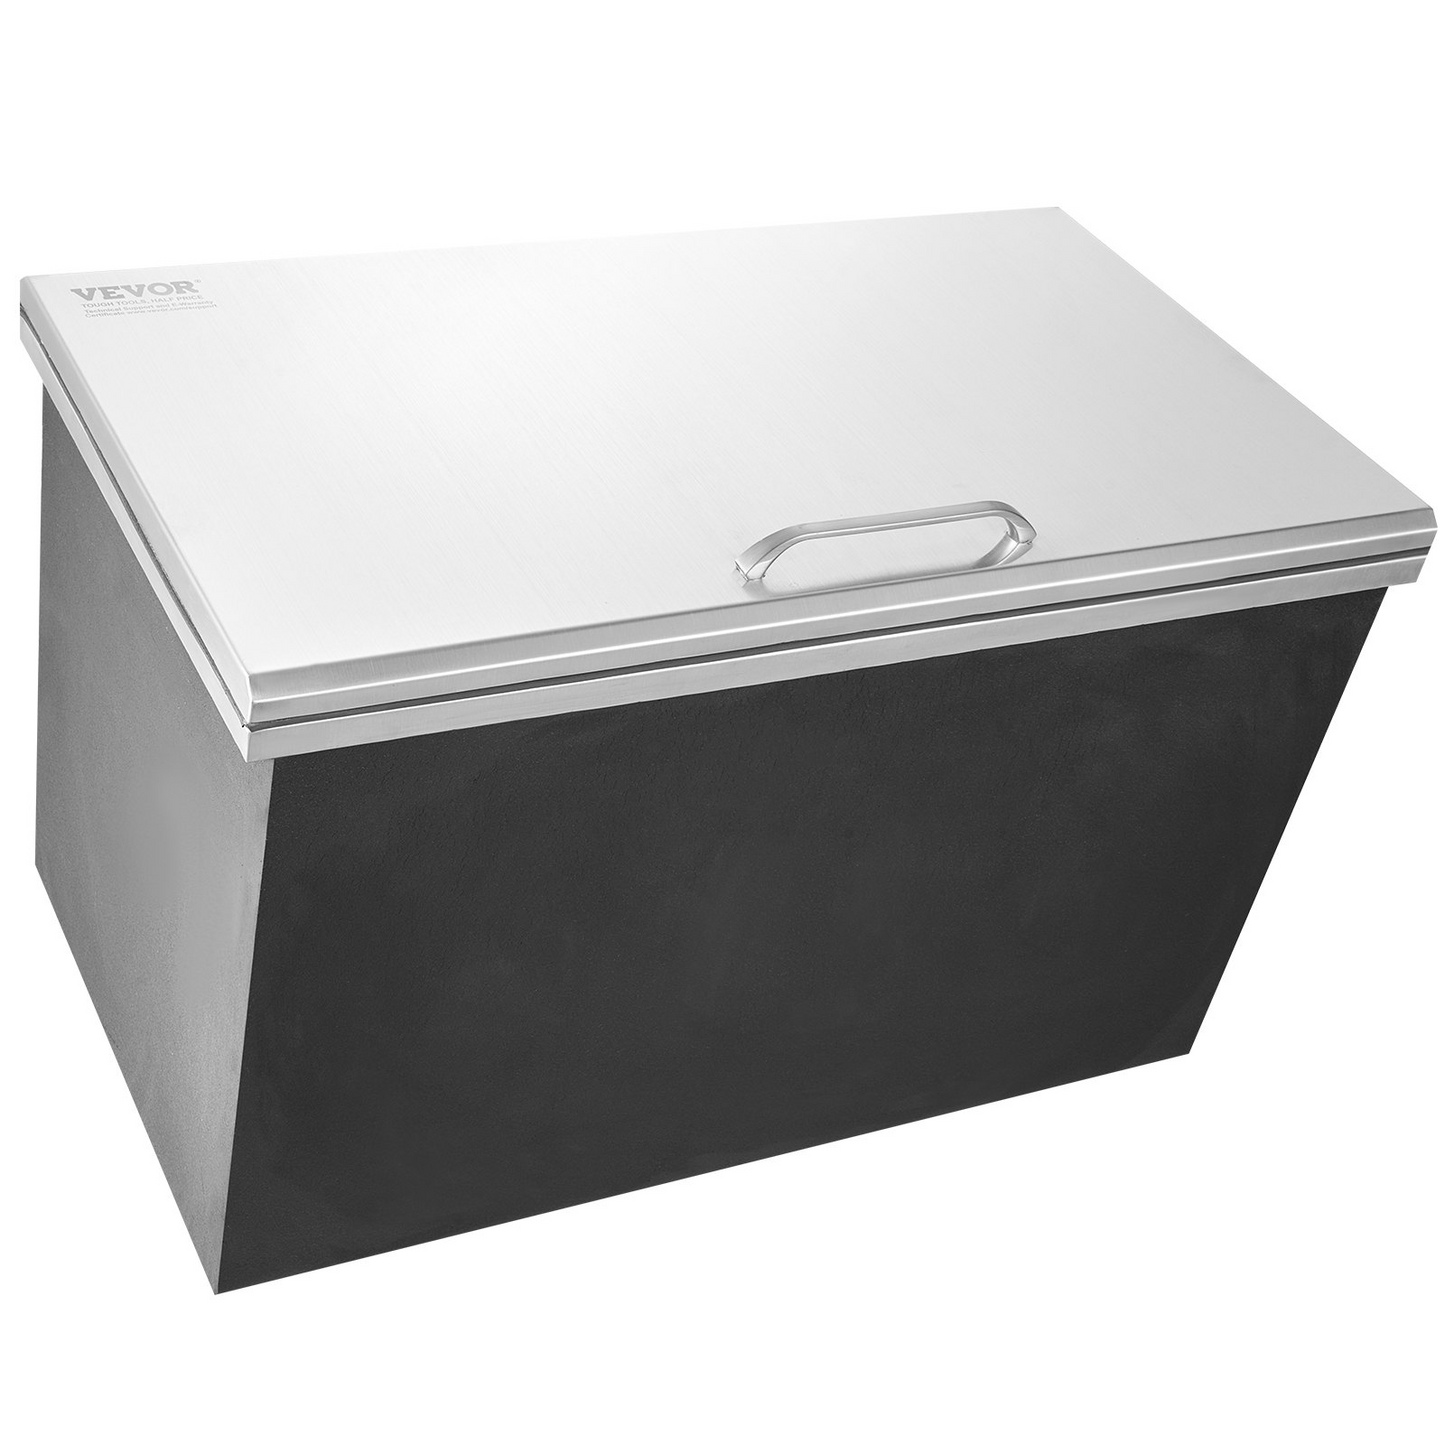 VEVOR Drop in Ice Chest, 24"L x 20"W x 15"H Stainless Steel Ice Cooler, Commercial Ice Bin with Hinged Cover, 40 qt Outdoor Kitchen Ice Bar, Drain-pipe and Drain Plug Included, for Cold Wine Beer, Goodies N Stuff